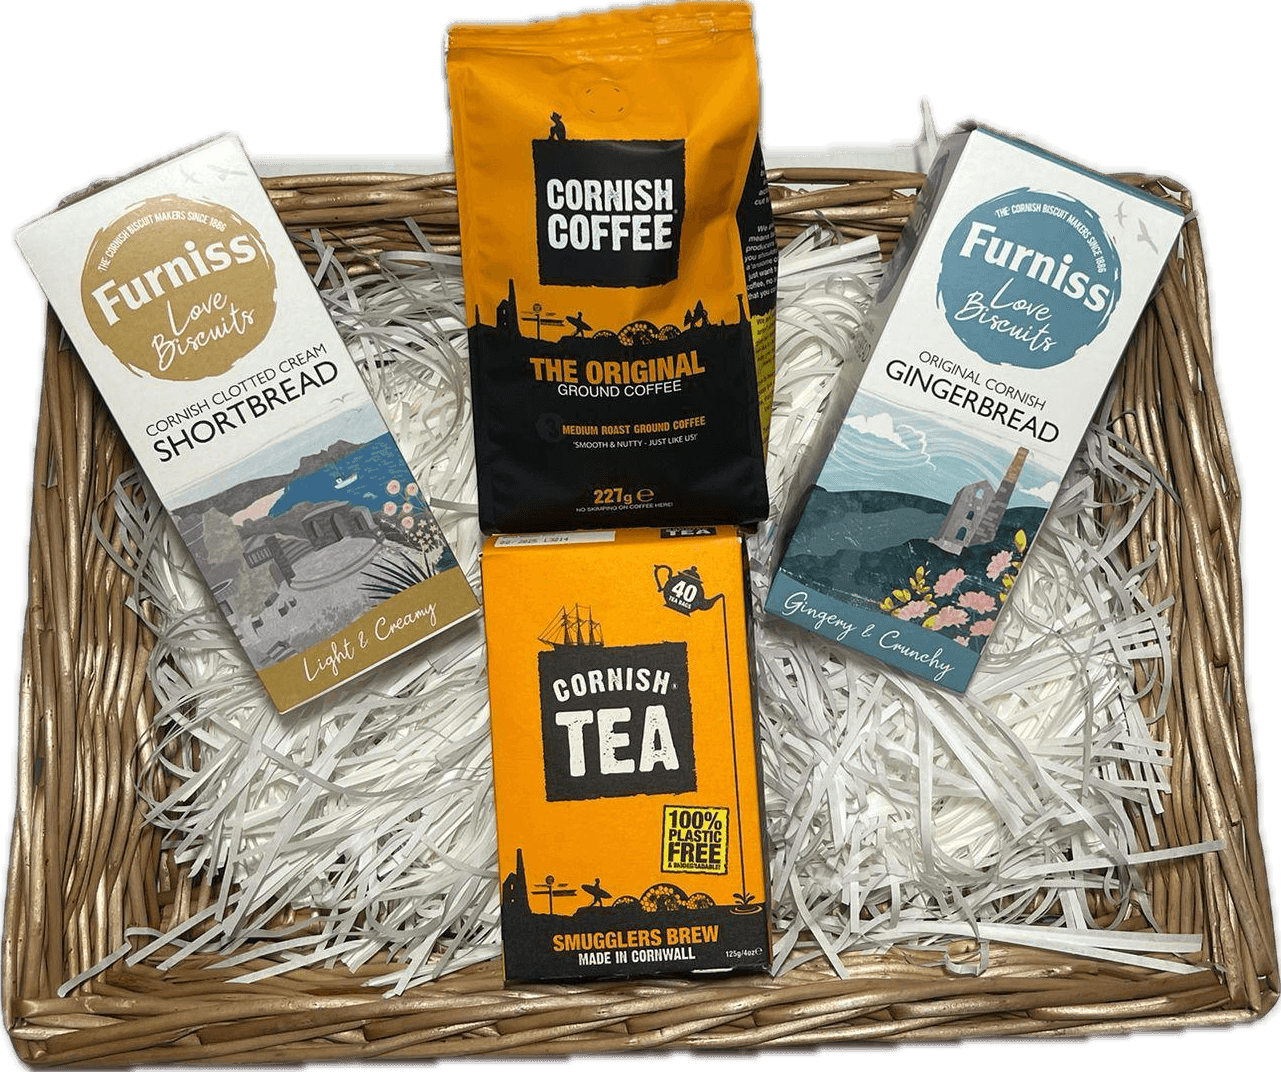 A beautifully presented gift hamper featuring an assortment of Cornish coffee and tea from the Cornish Tea and Coffee Company, paired with traditional Furniss Cornish biscuits, capturing the authentic flavours of Cornwall - Tin Coast Treats